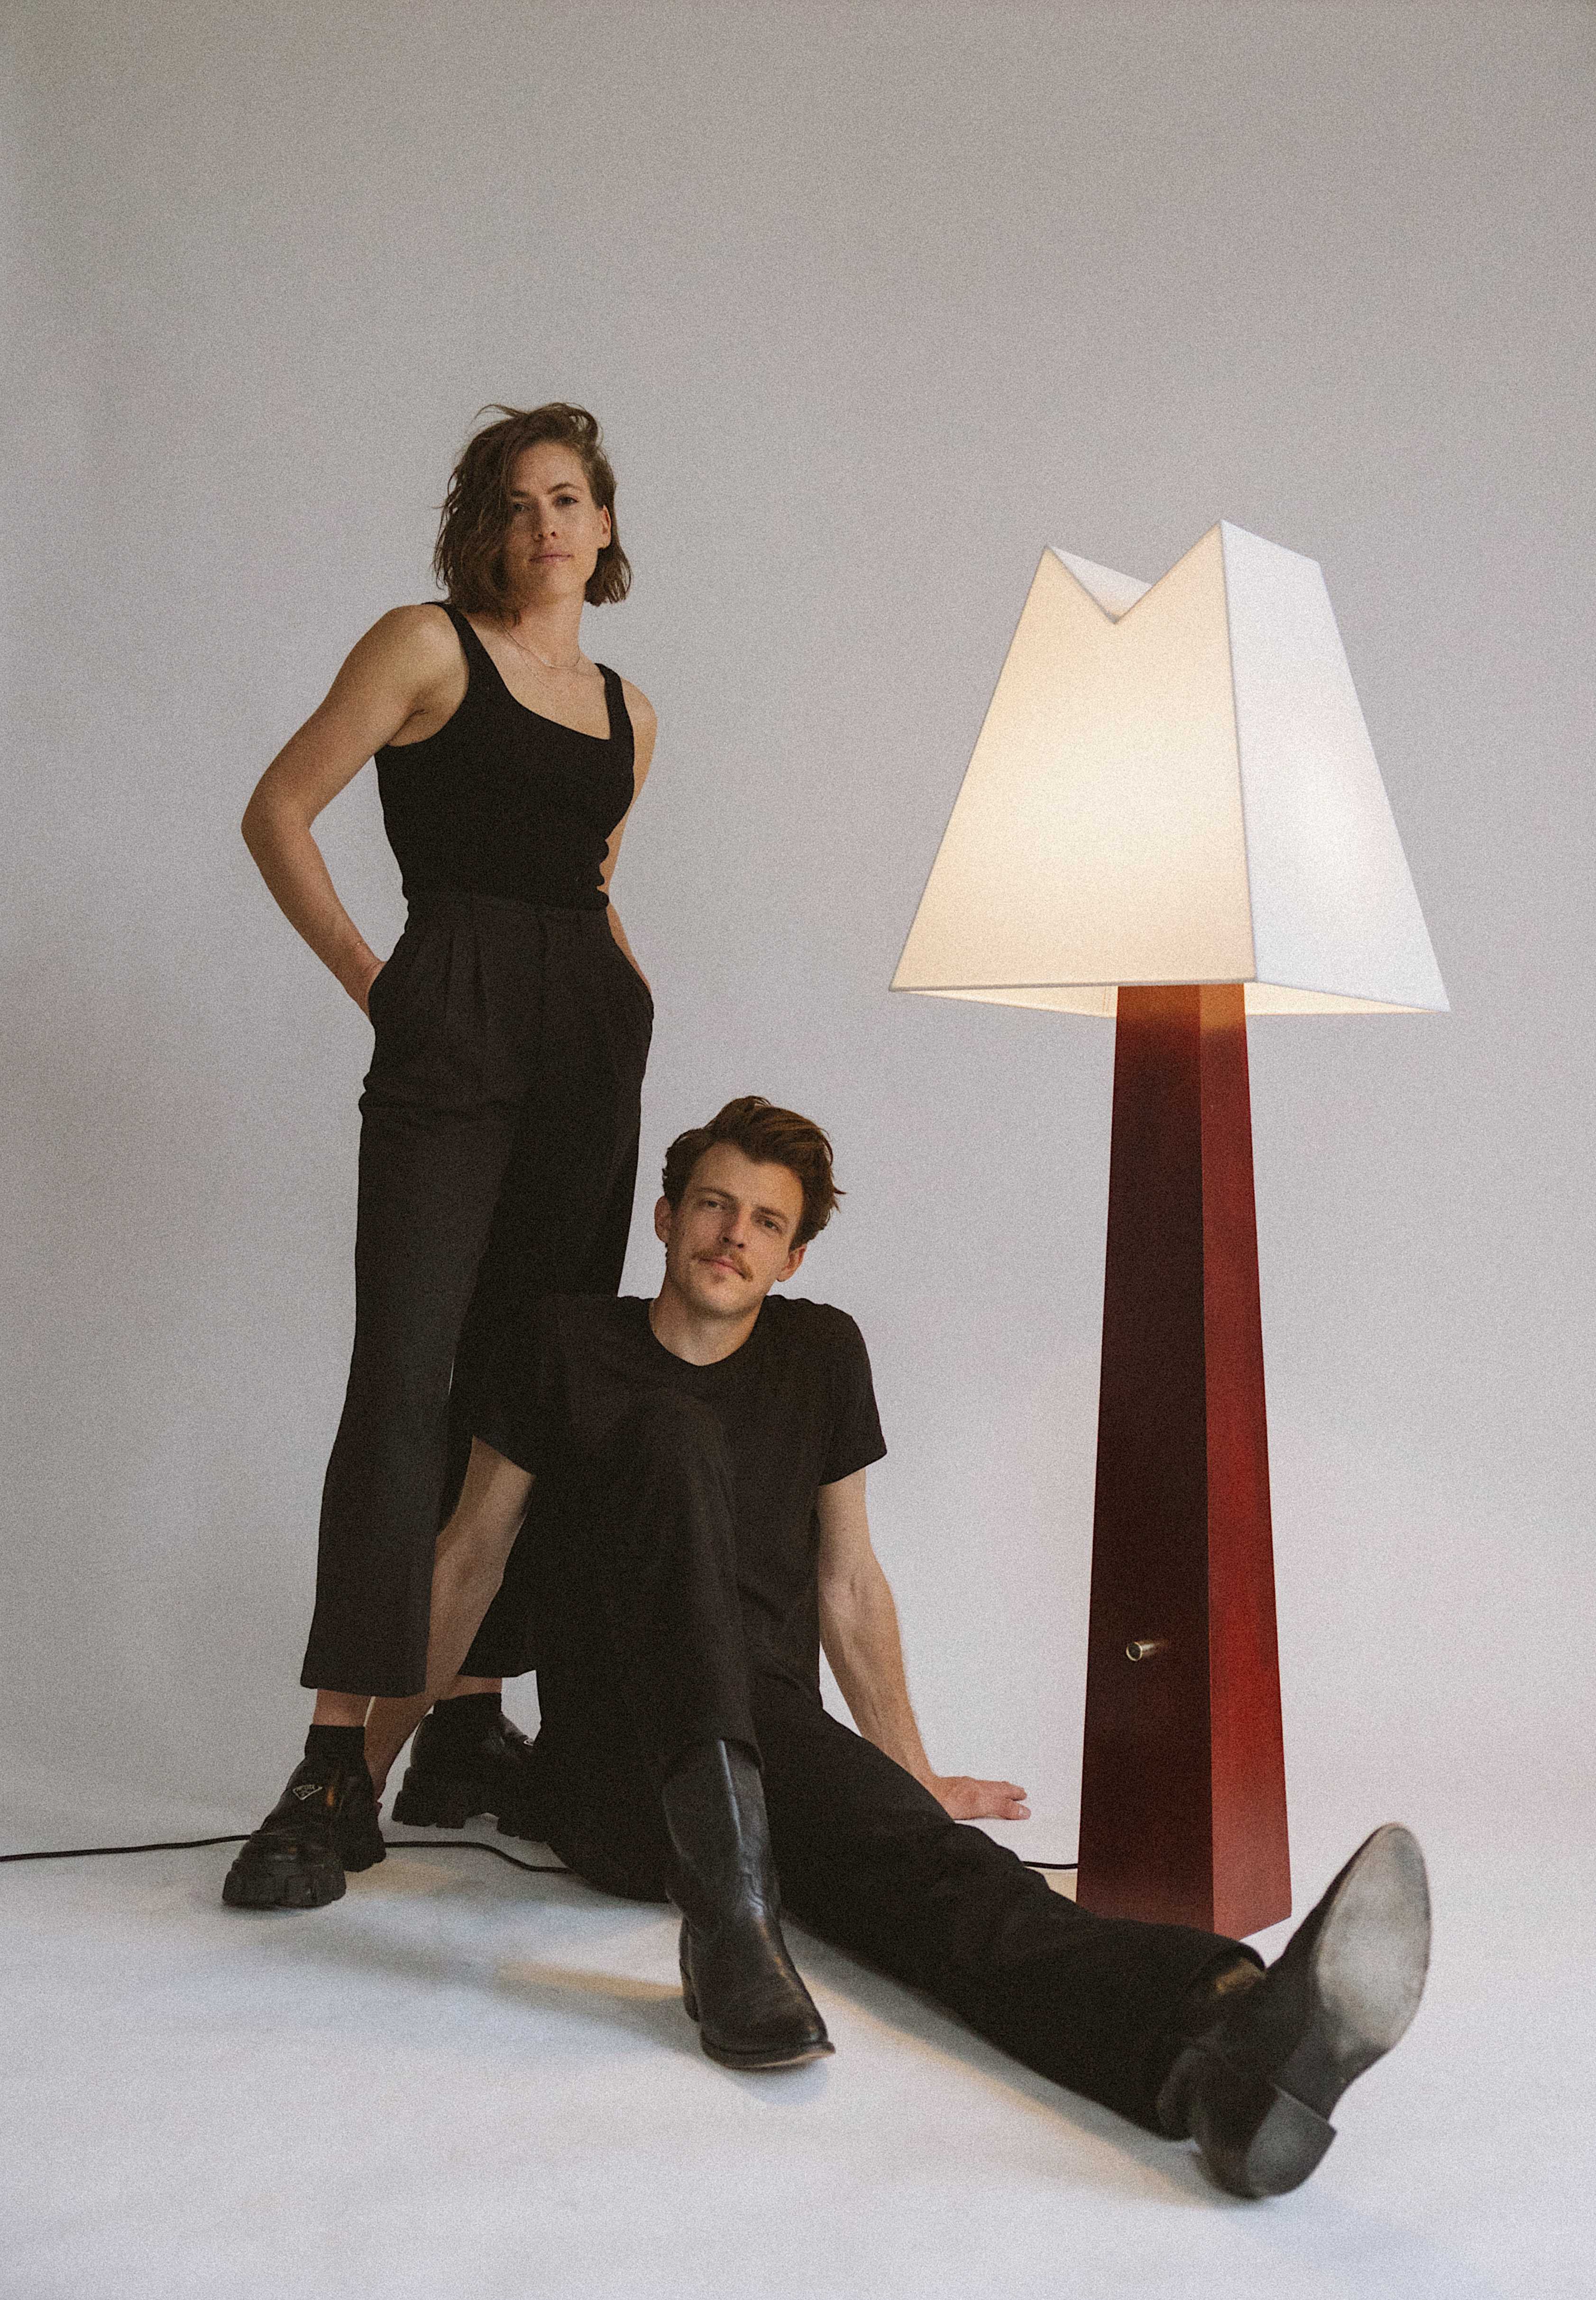 Jacob and Chelsie Starley, pose with floor lamp from Alpine collection